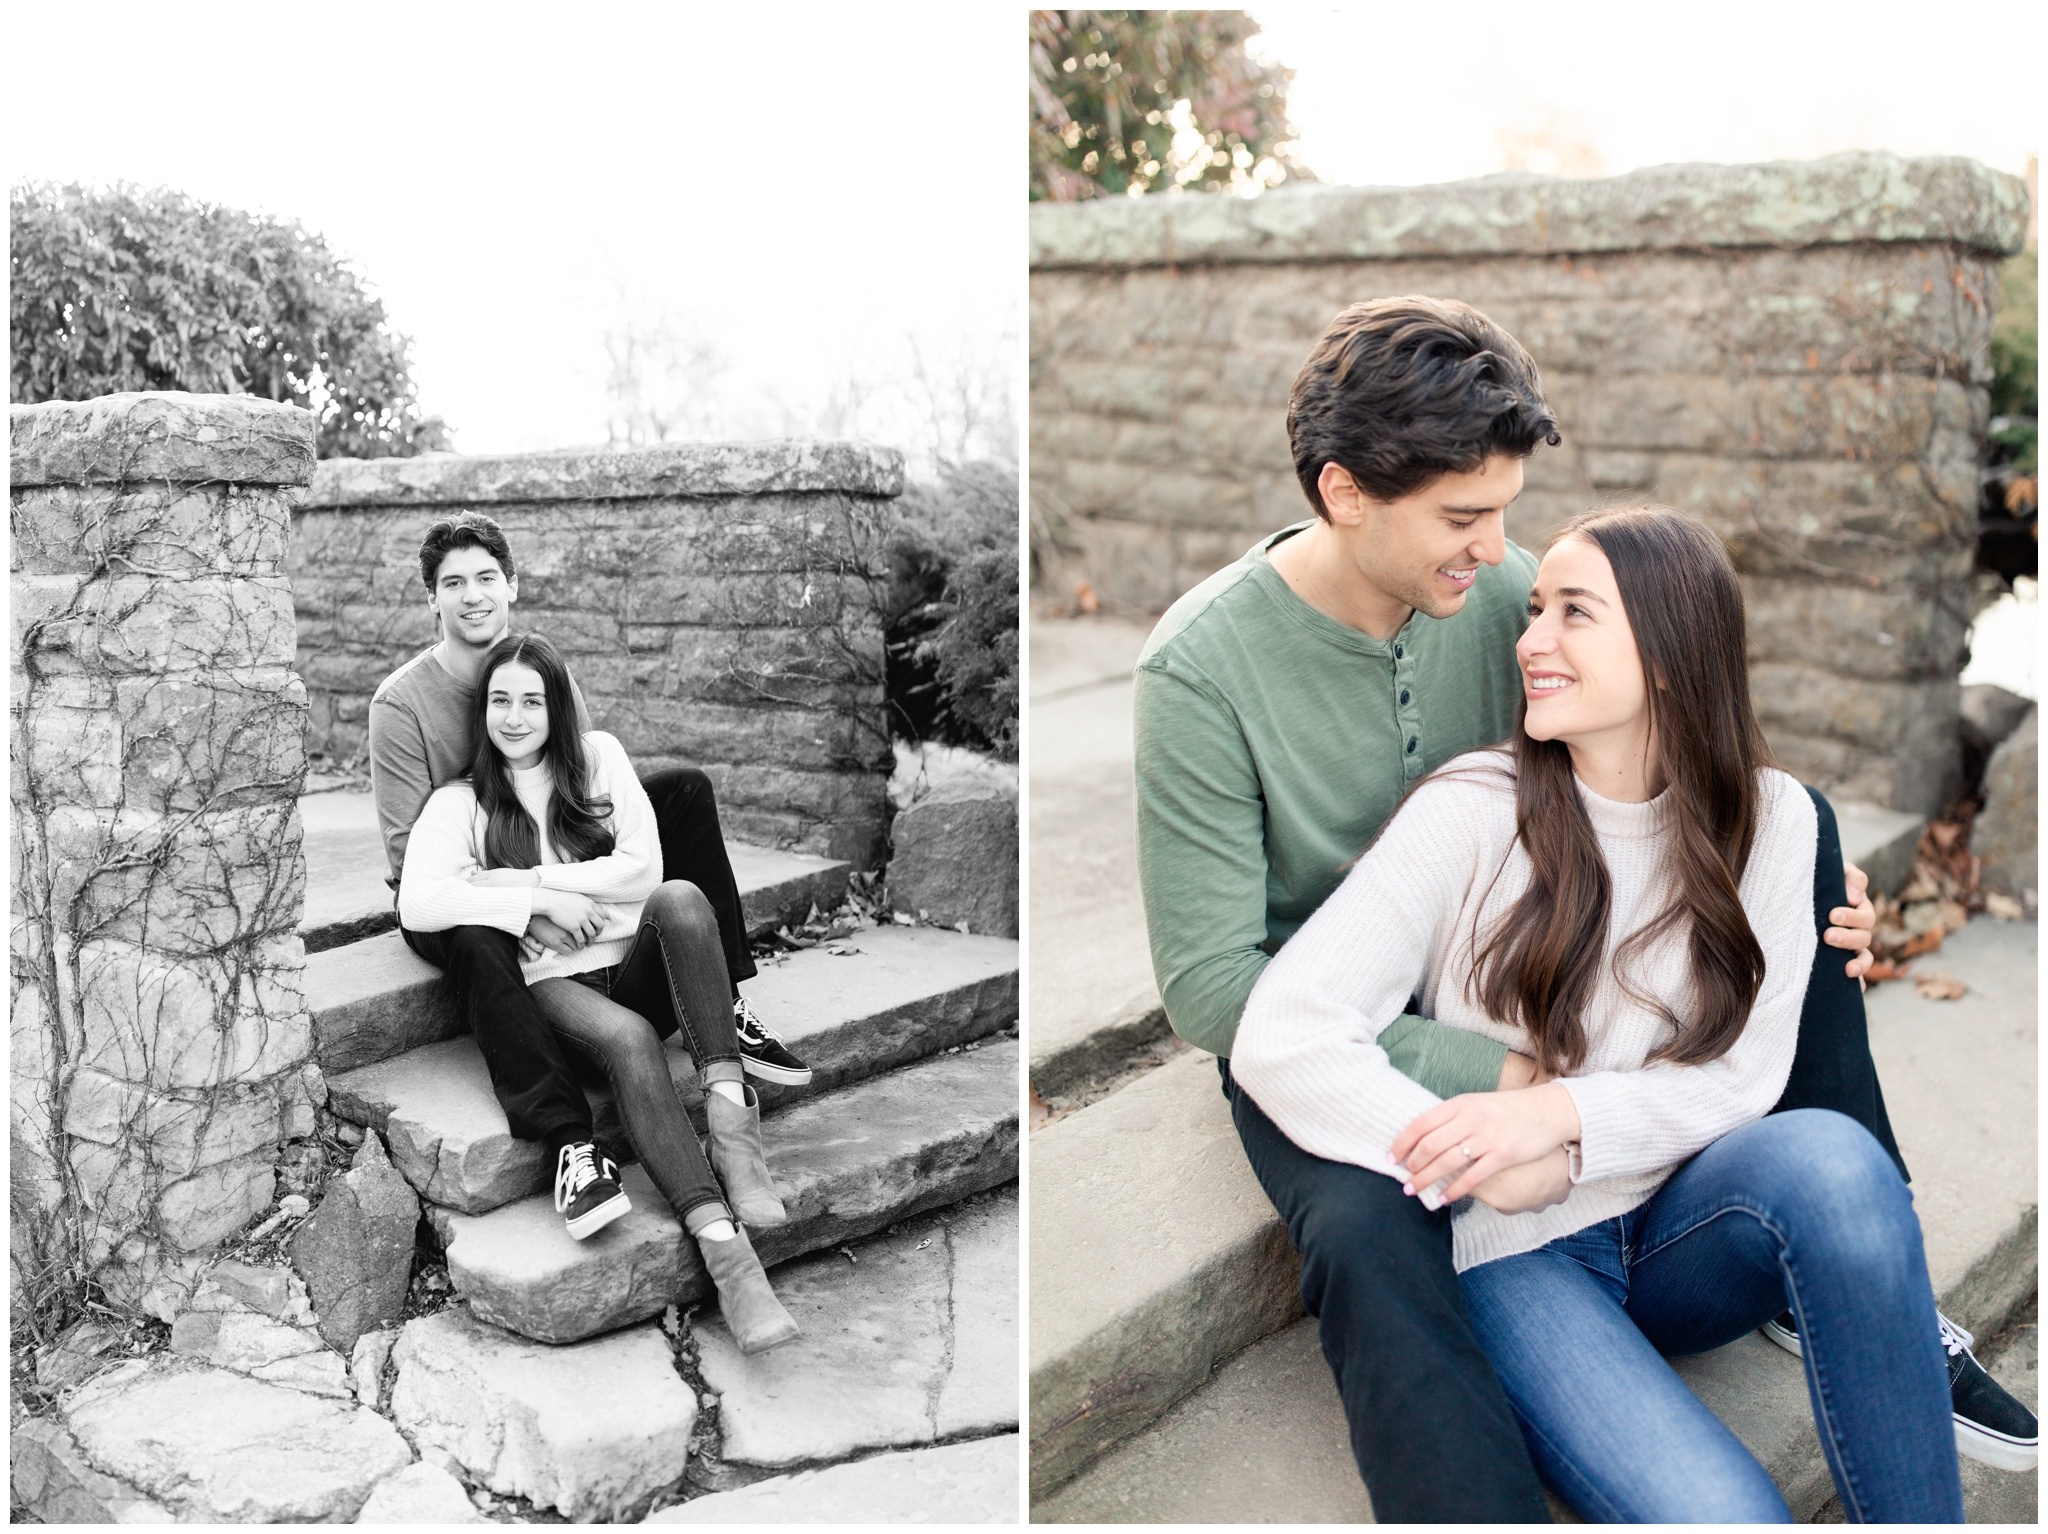 Engagement photos on step at the Boise Train Depot